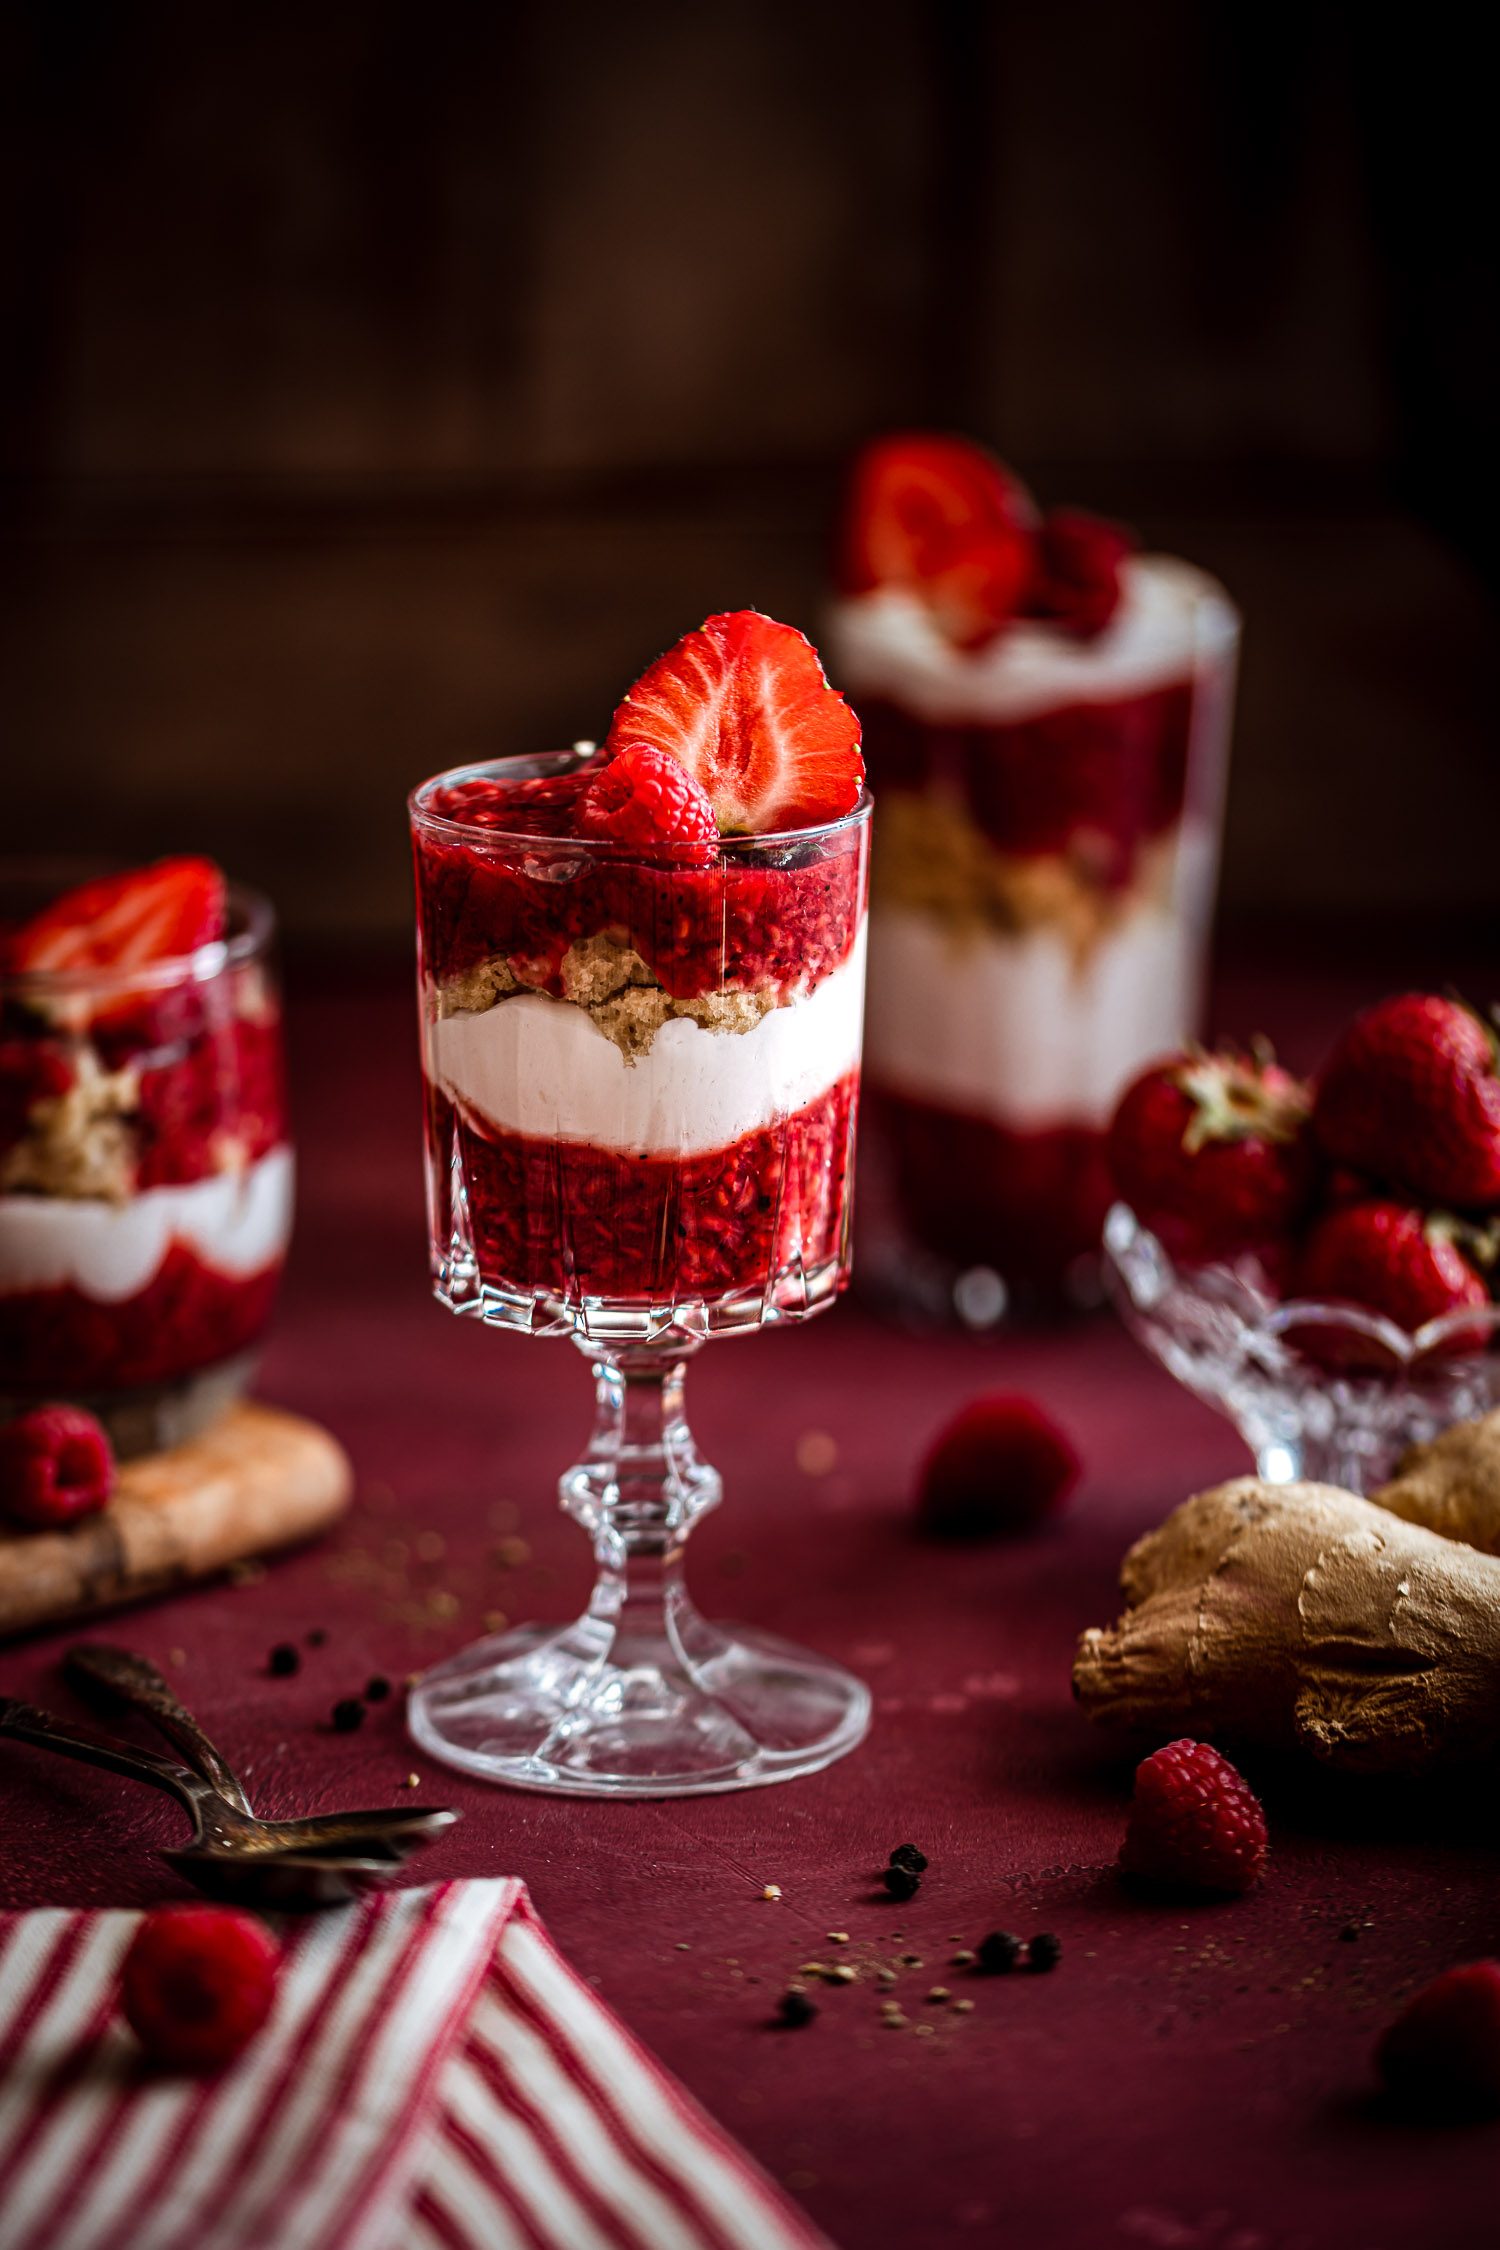 Spicy Berry Trifle topped with fresh strawberry